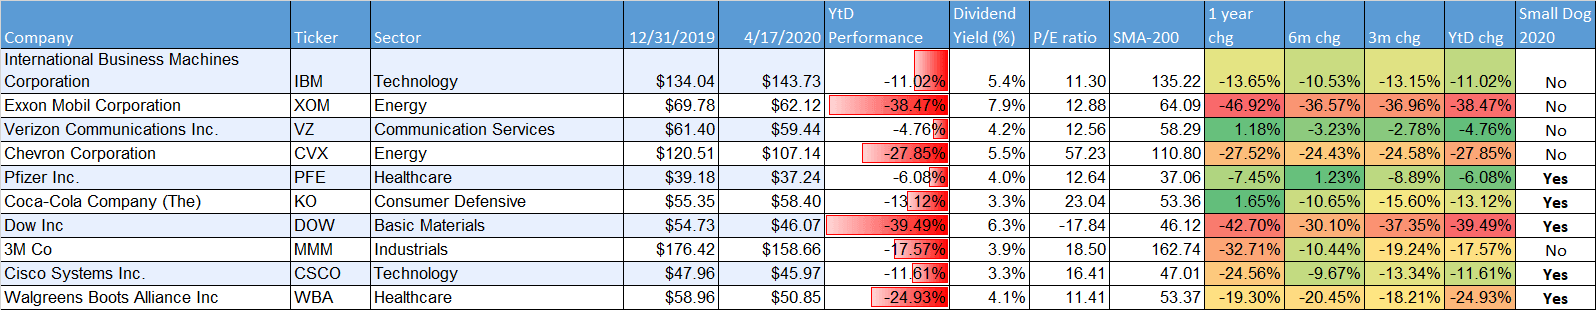 dog-of-the-dow-performance-april-2020